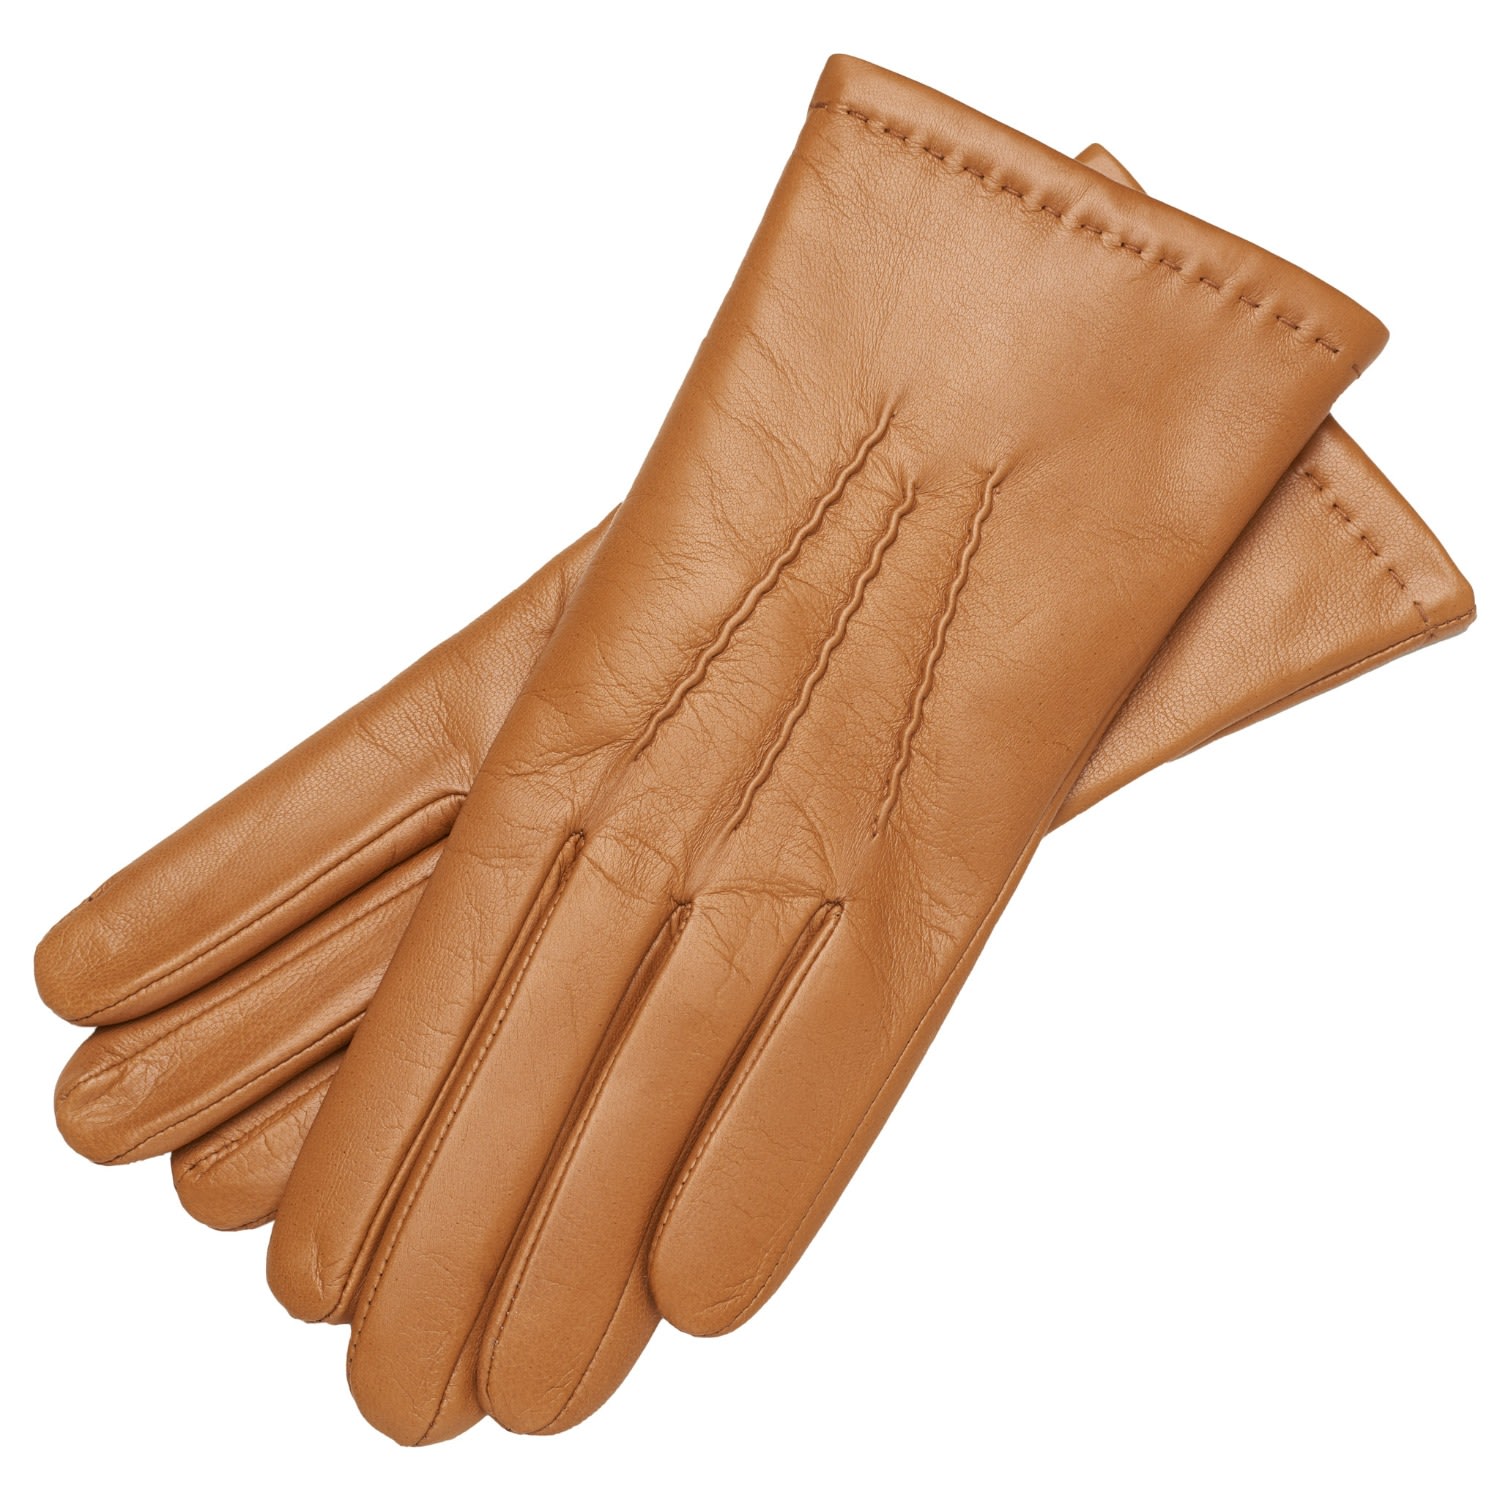 Brown Cremona - Women’s Handmade Gloves In Camel Nappa Leather 7" 1861 Glove Manufactory